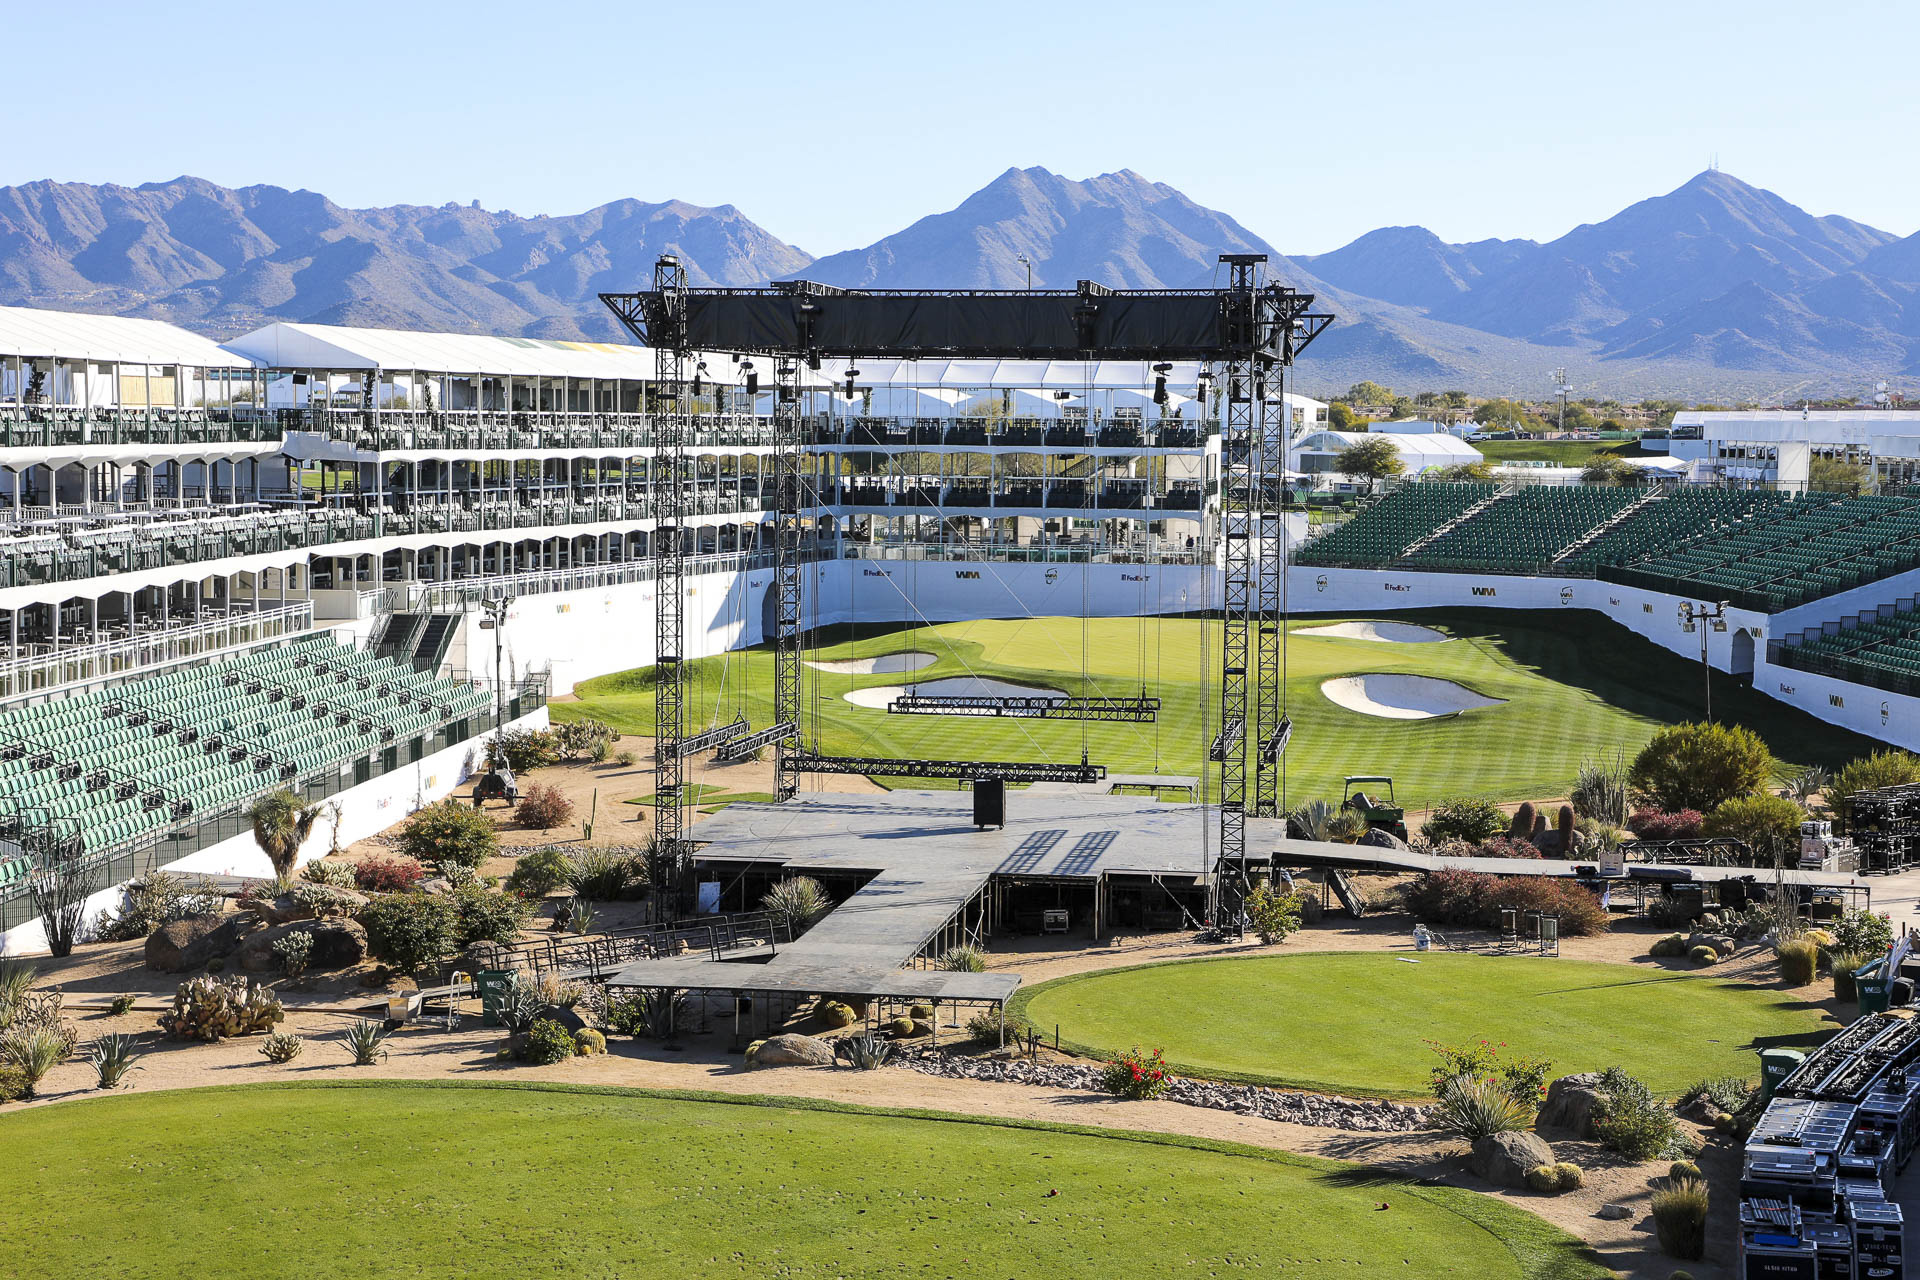 WM Phoenix Open To Kick Off Tournament With Concert on Iconic 16th Hole